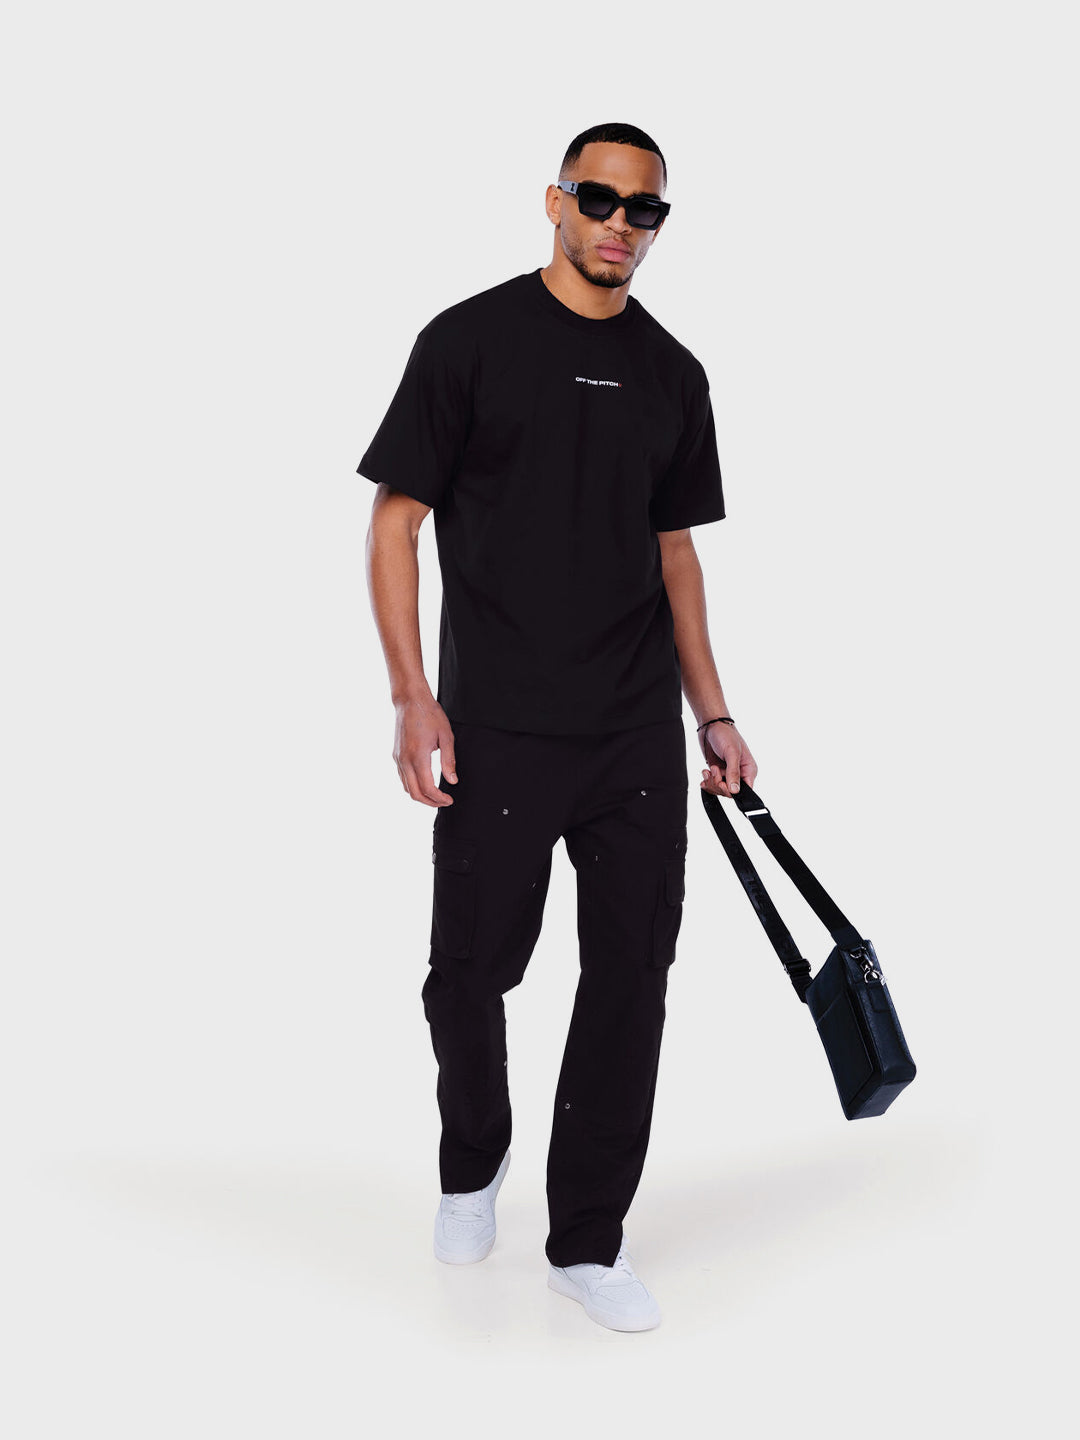 off the pitch oversized t-shirt